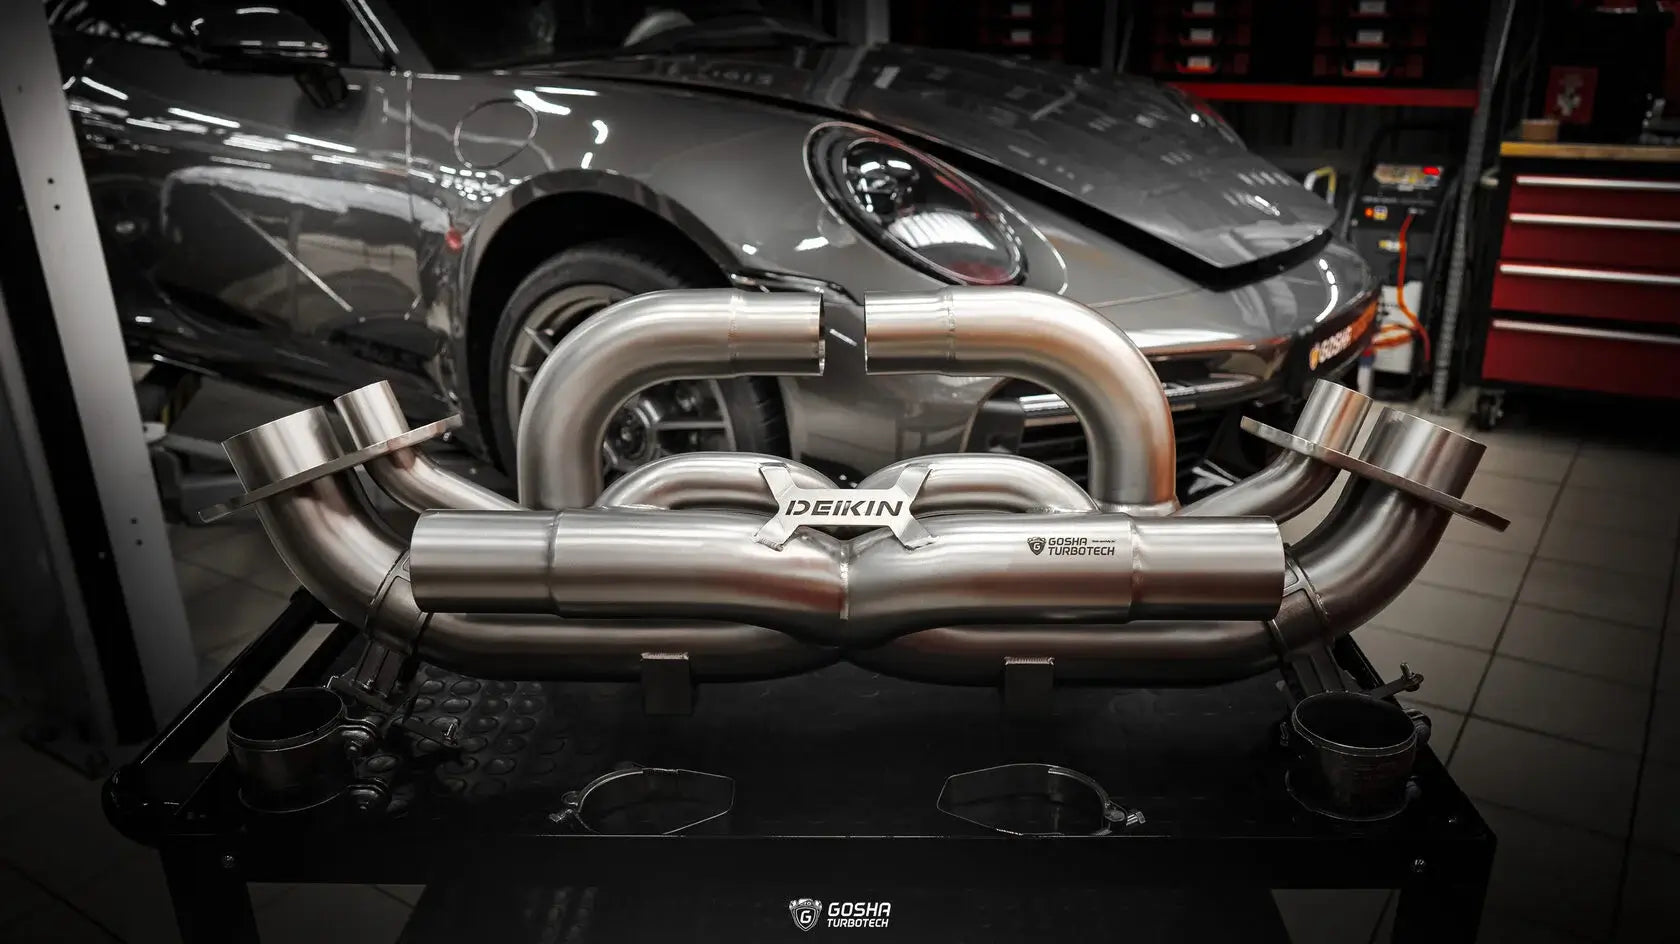 DEIKIN 10-PO.911.T/TS.992.R-ES-DP-Ti-00 Exhaust system "Race" Titan for Porsche 911 Turbo/Turbo S (992) complete with downpipes without HeatShield Photo-8 